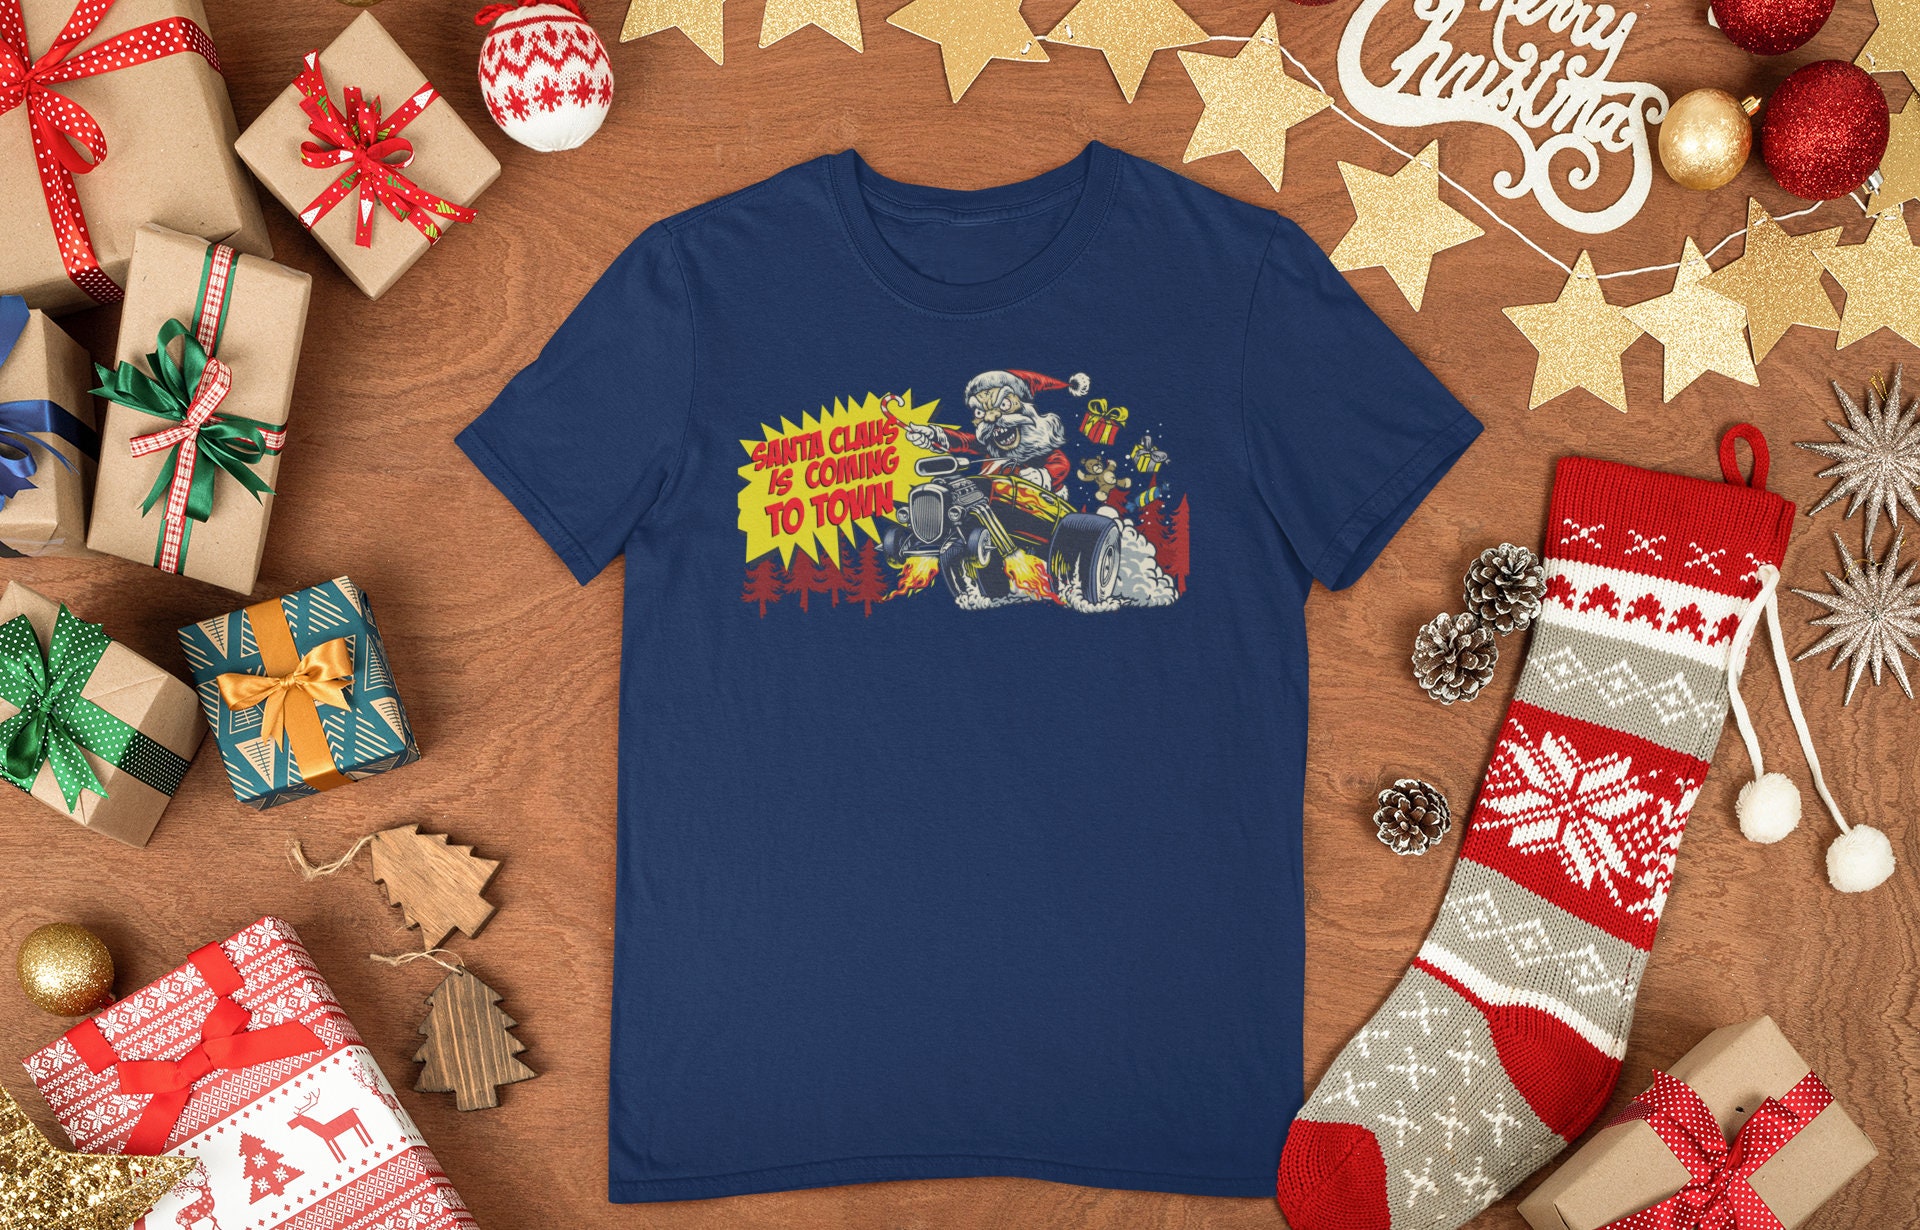 Discover Santa Claus is Coming to Town, Funny Christmas Shirt, XMAS Funny Tee